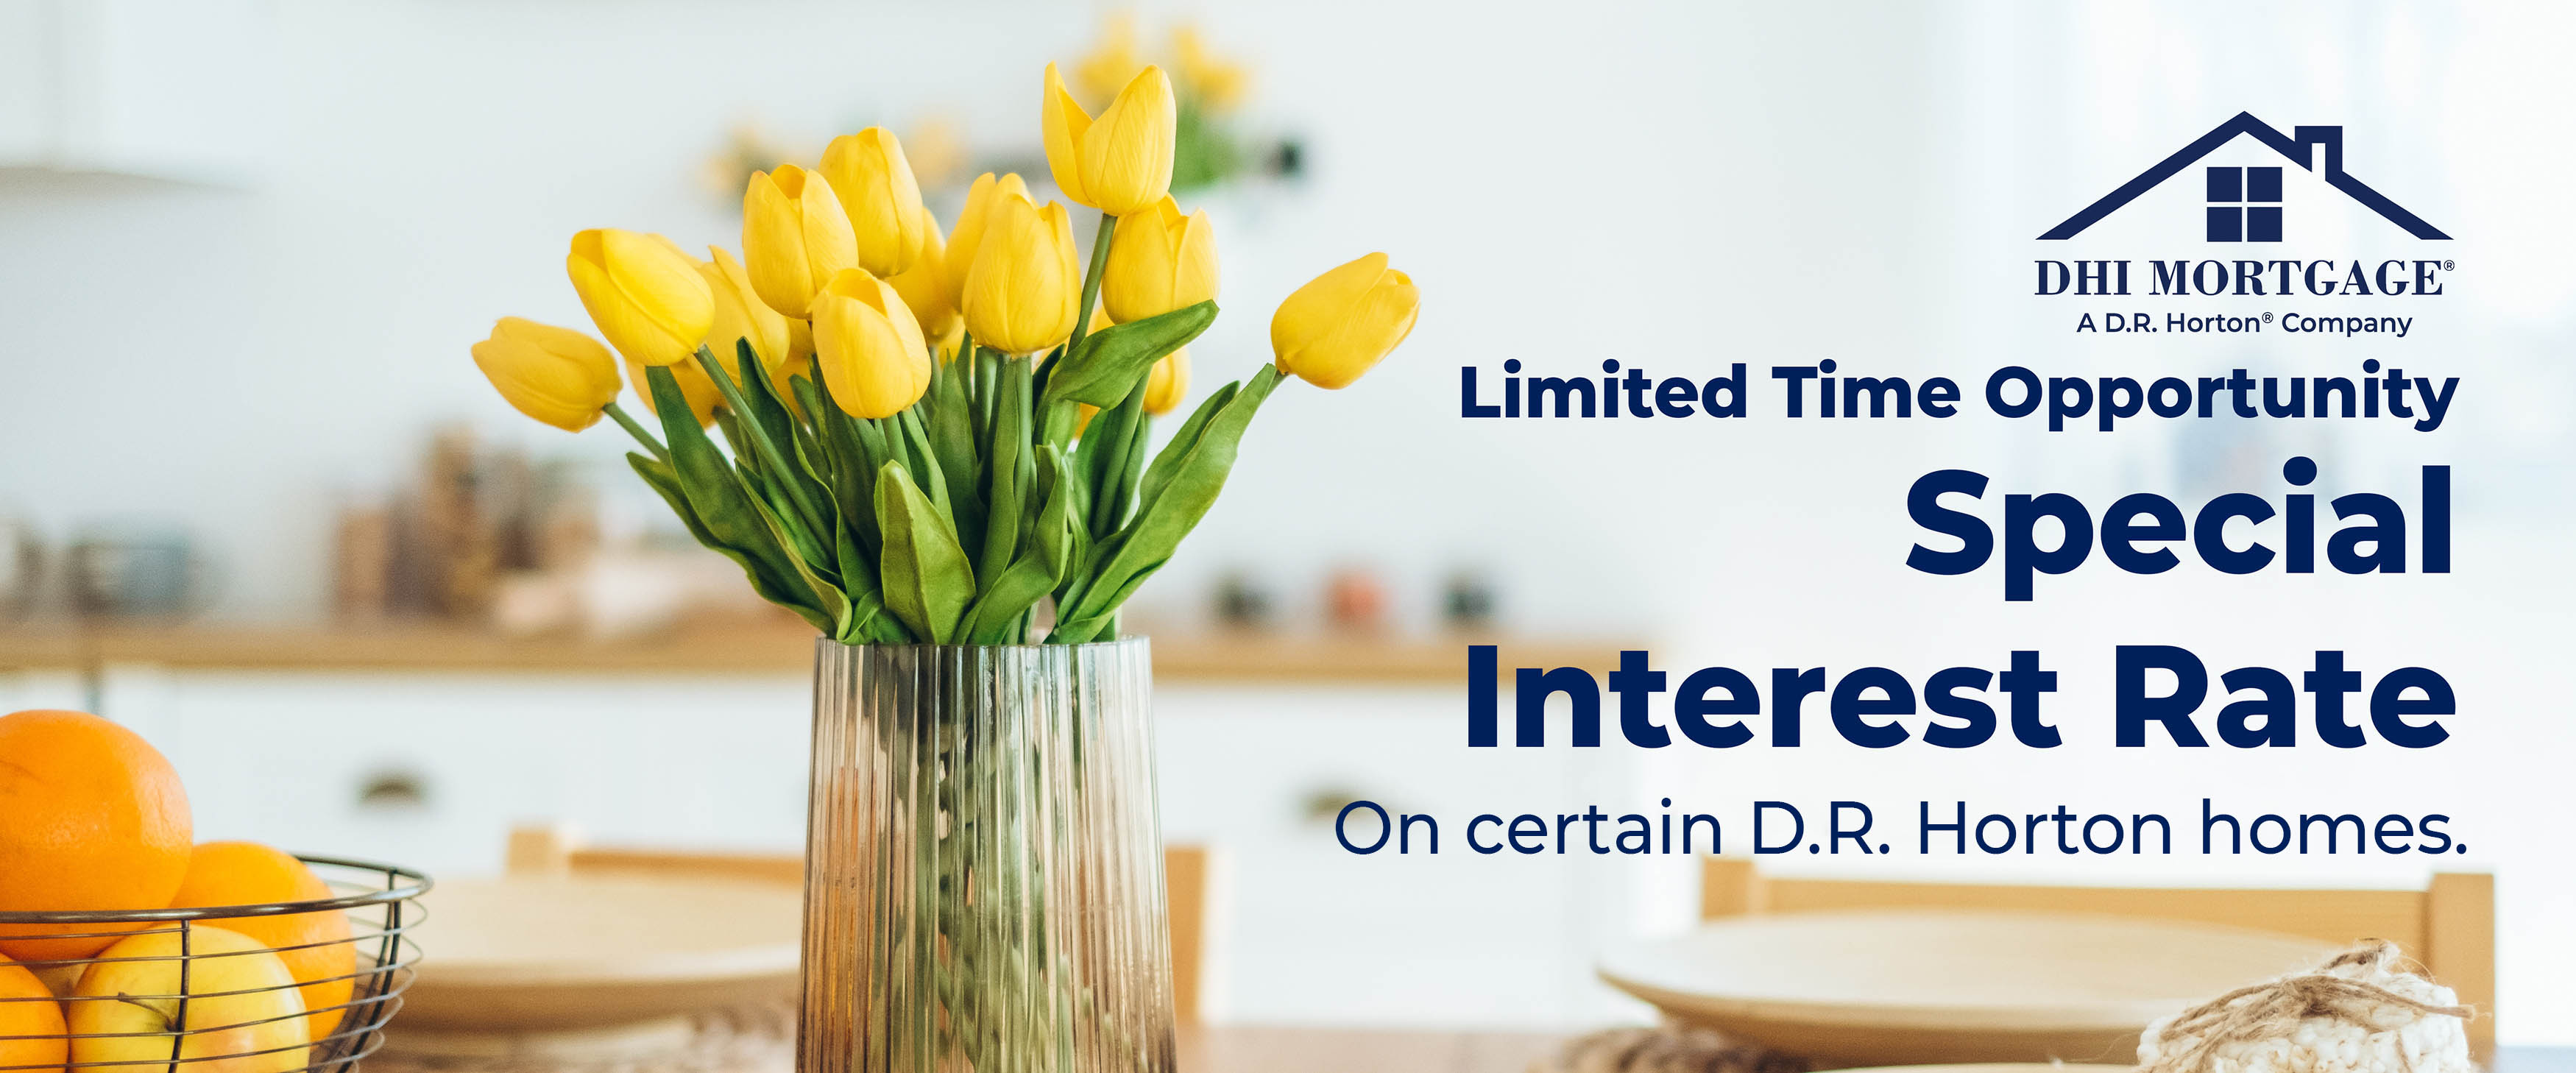 Limited Time Opportunity Special Interest Rate On certain D.R. Horton homes. 